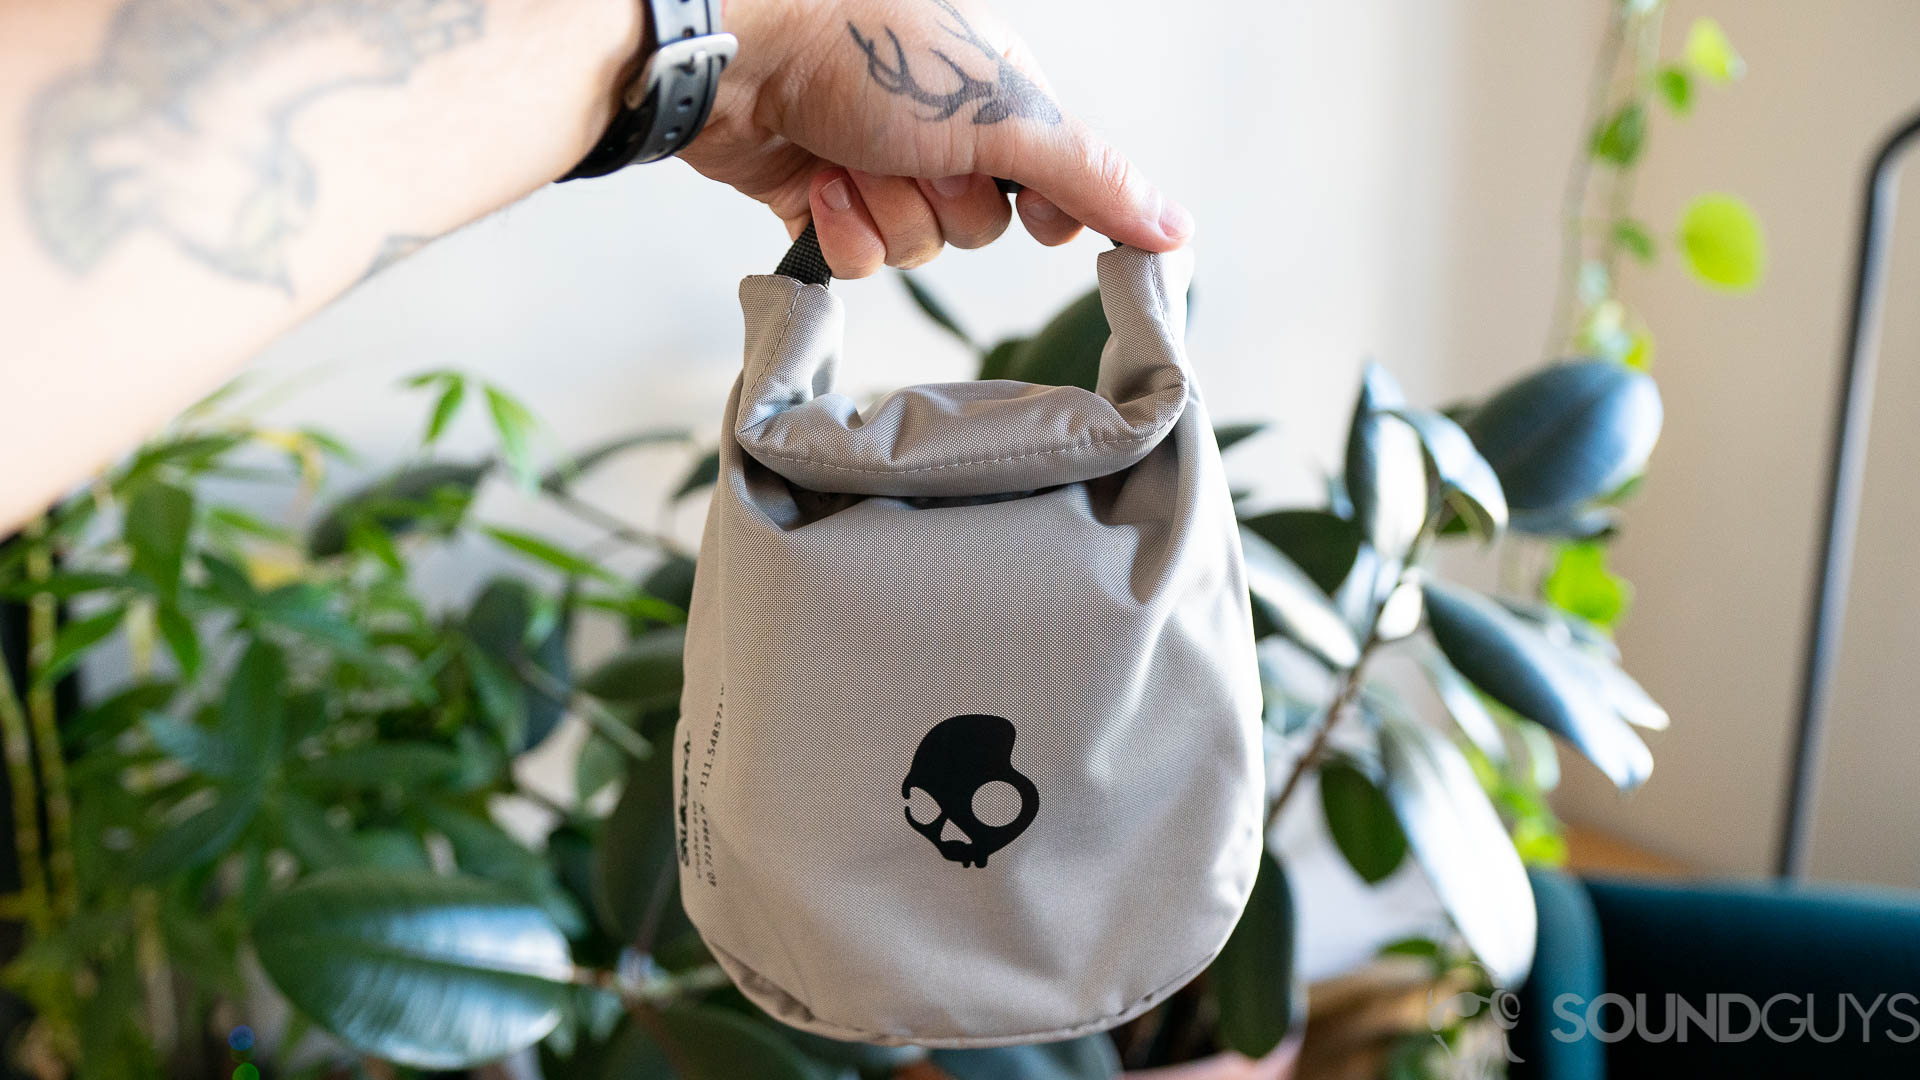 Man holding the Skullcandy Crusher Evo traveling pouch in front of plants.